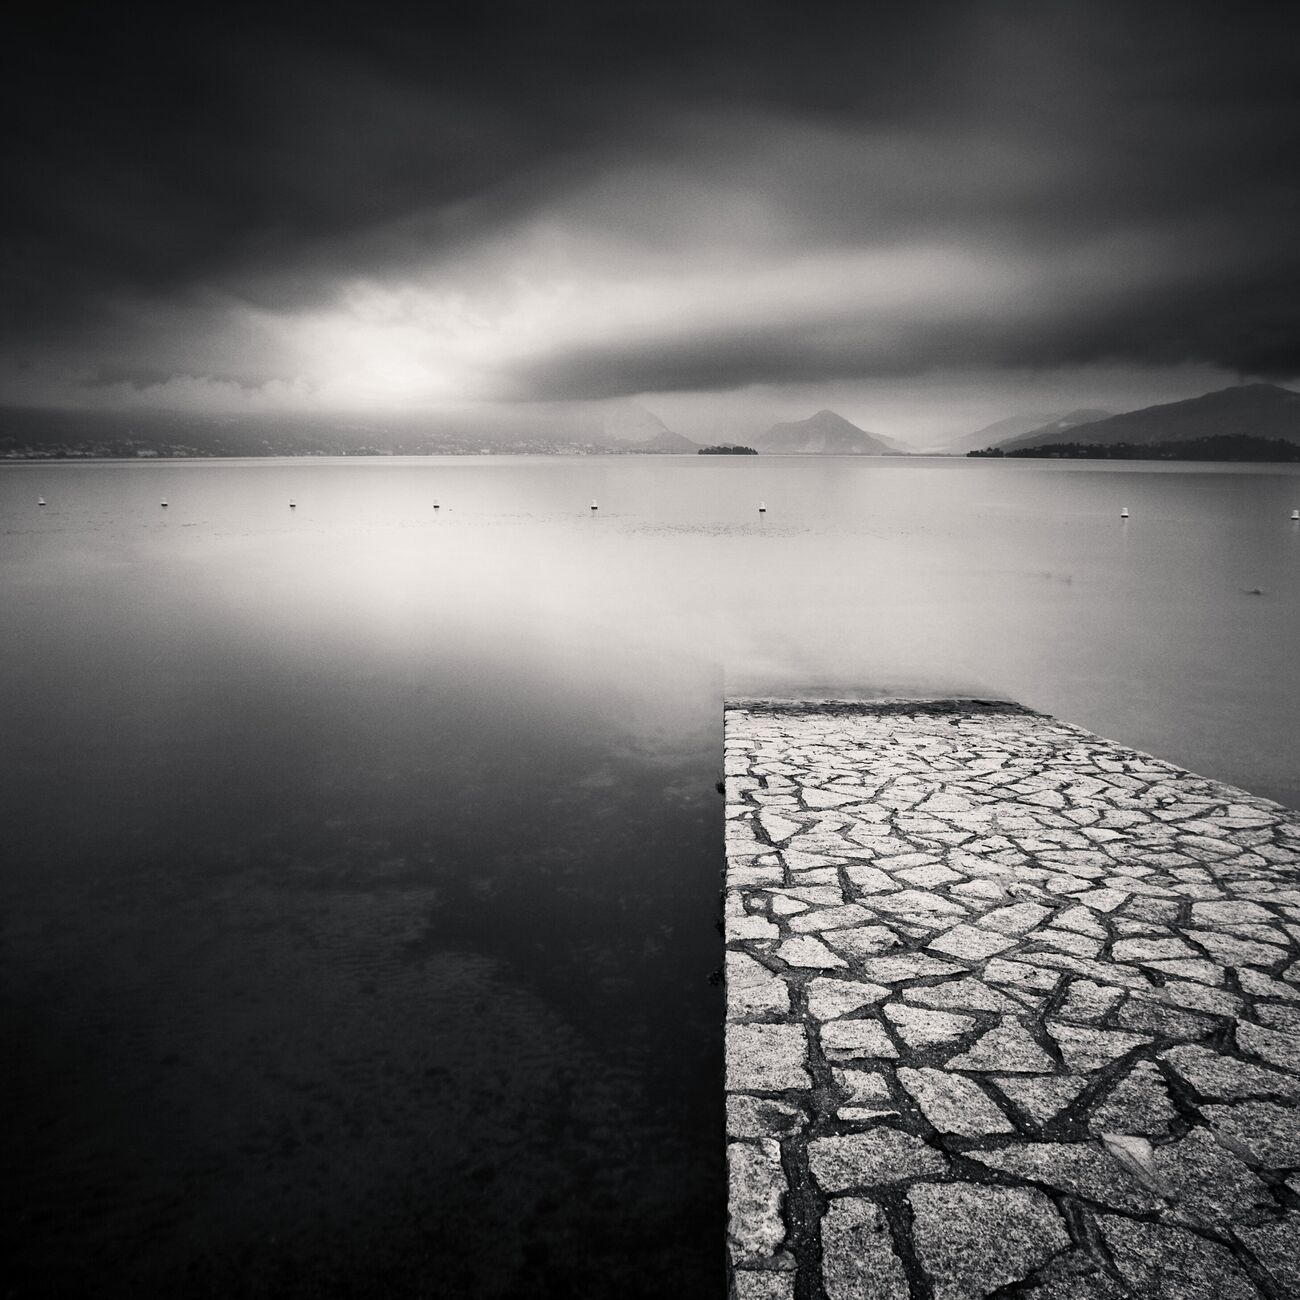 Paved Ramp, Study 1, Lake Maggiore, Italy. August 2014. Ref-1302 - Denis Olivier Photography